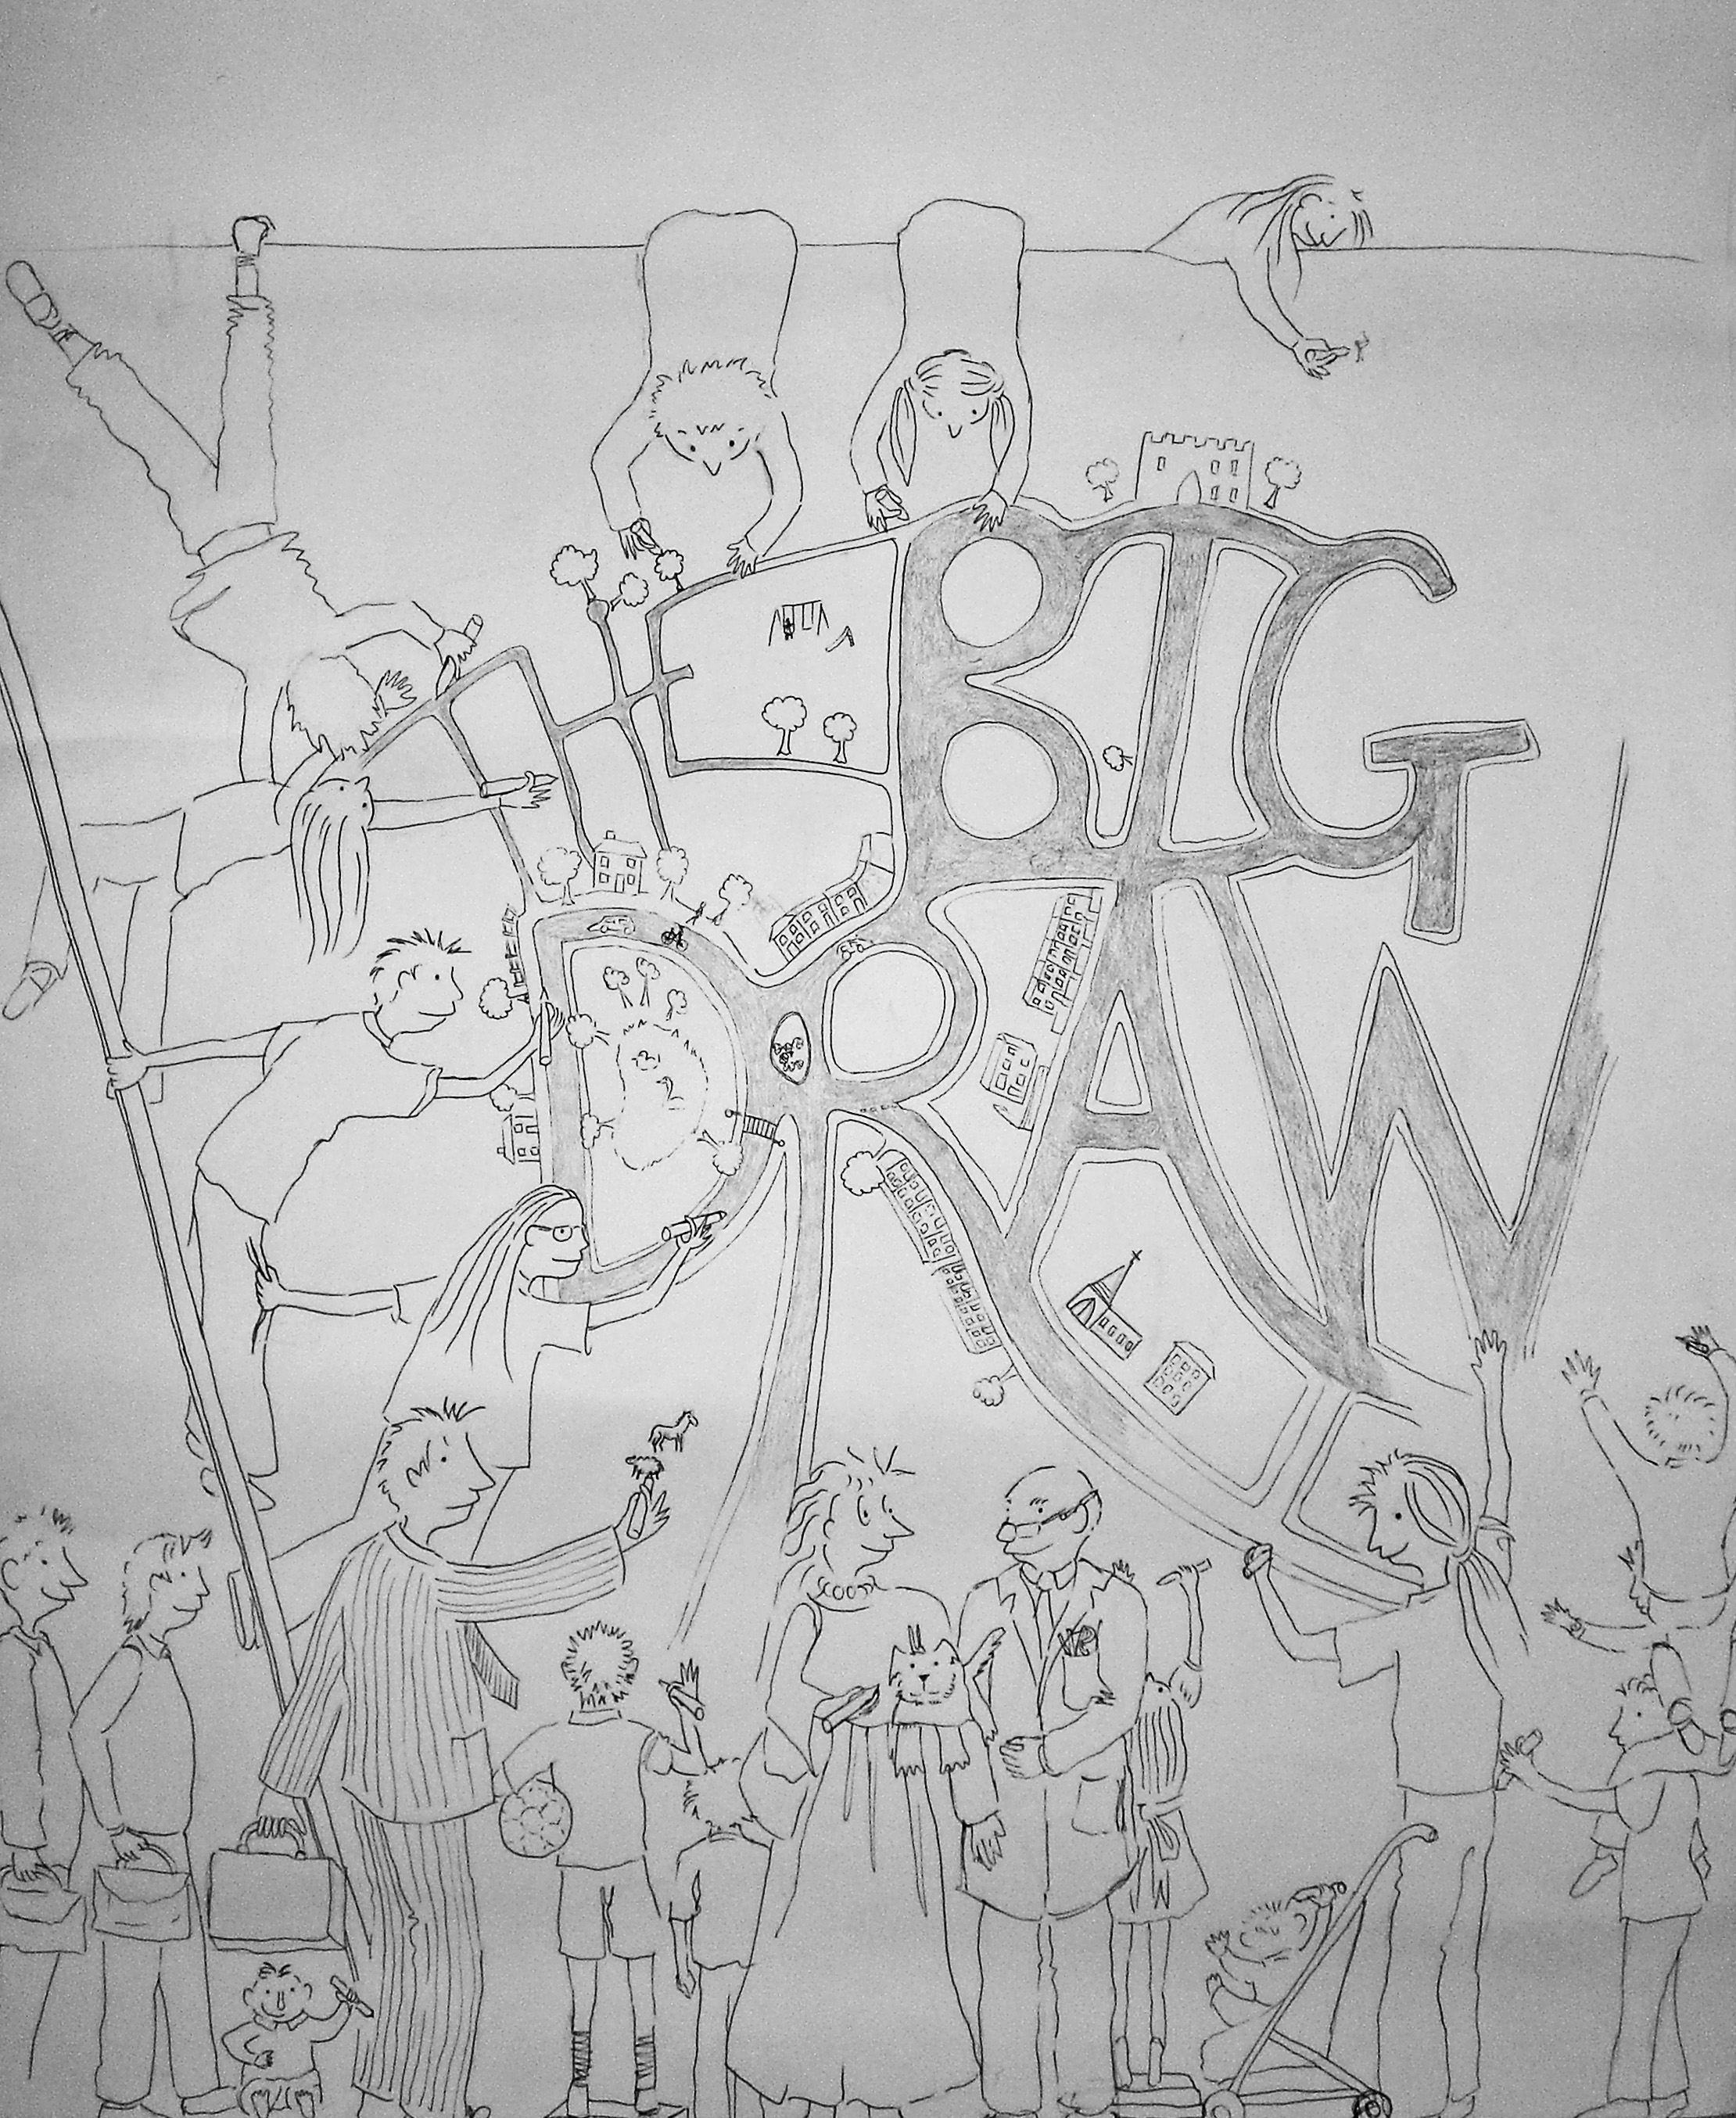 More information about "The Big Draw at Meadowdale Middle School"